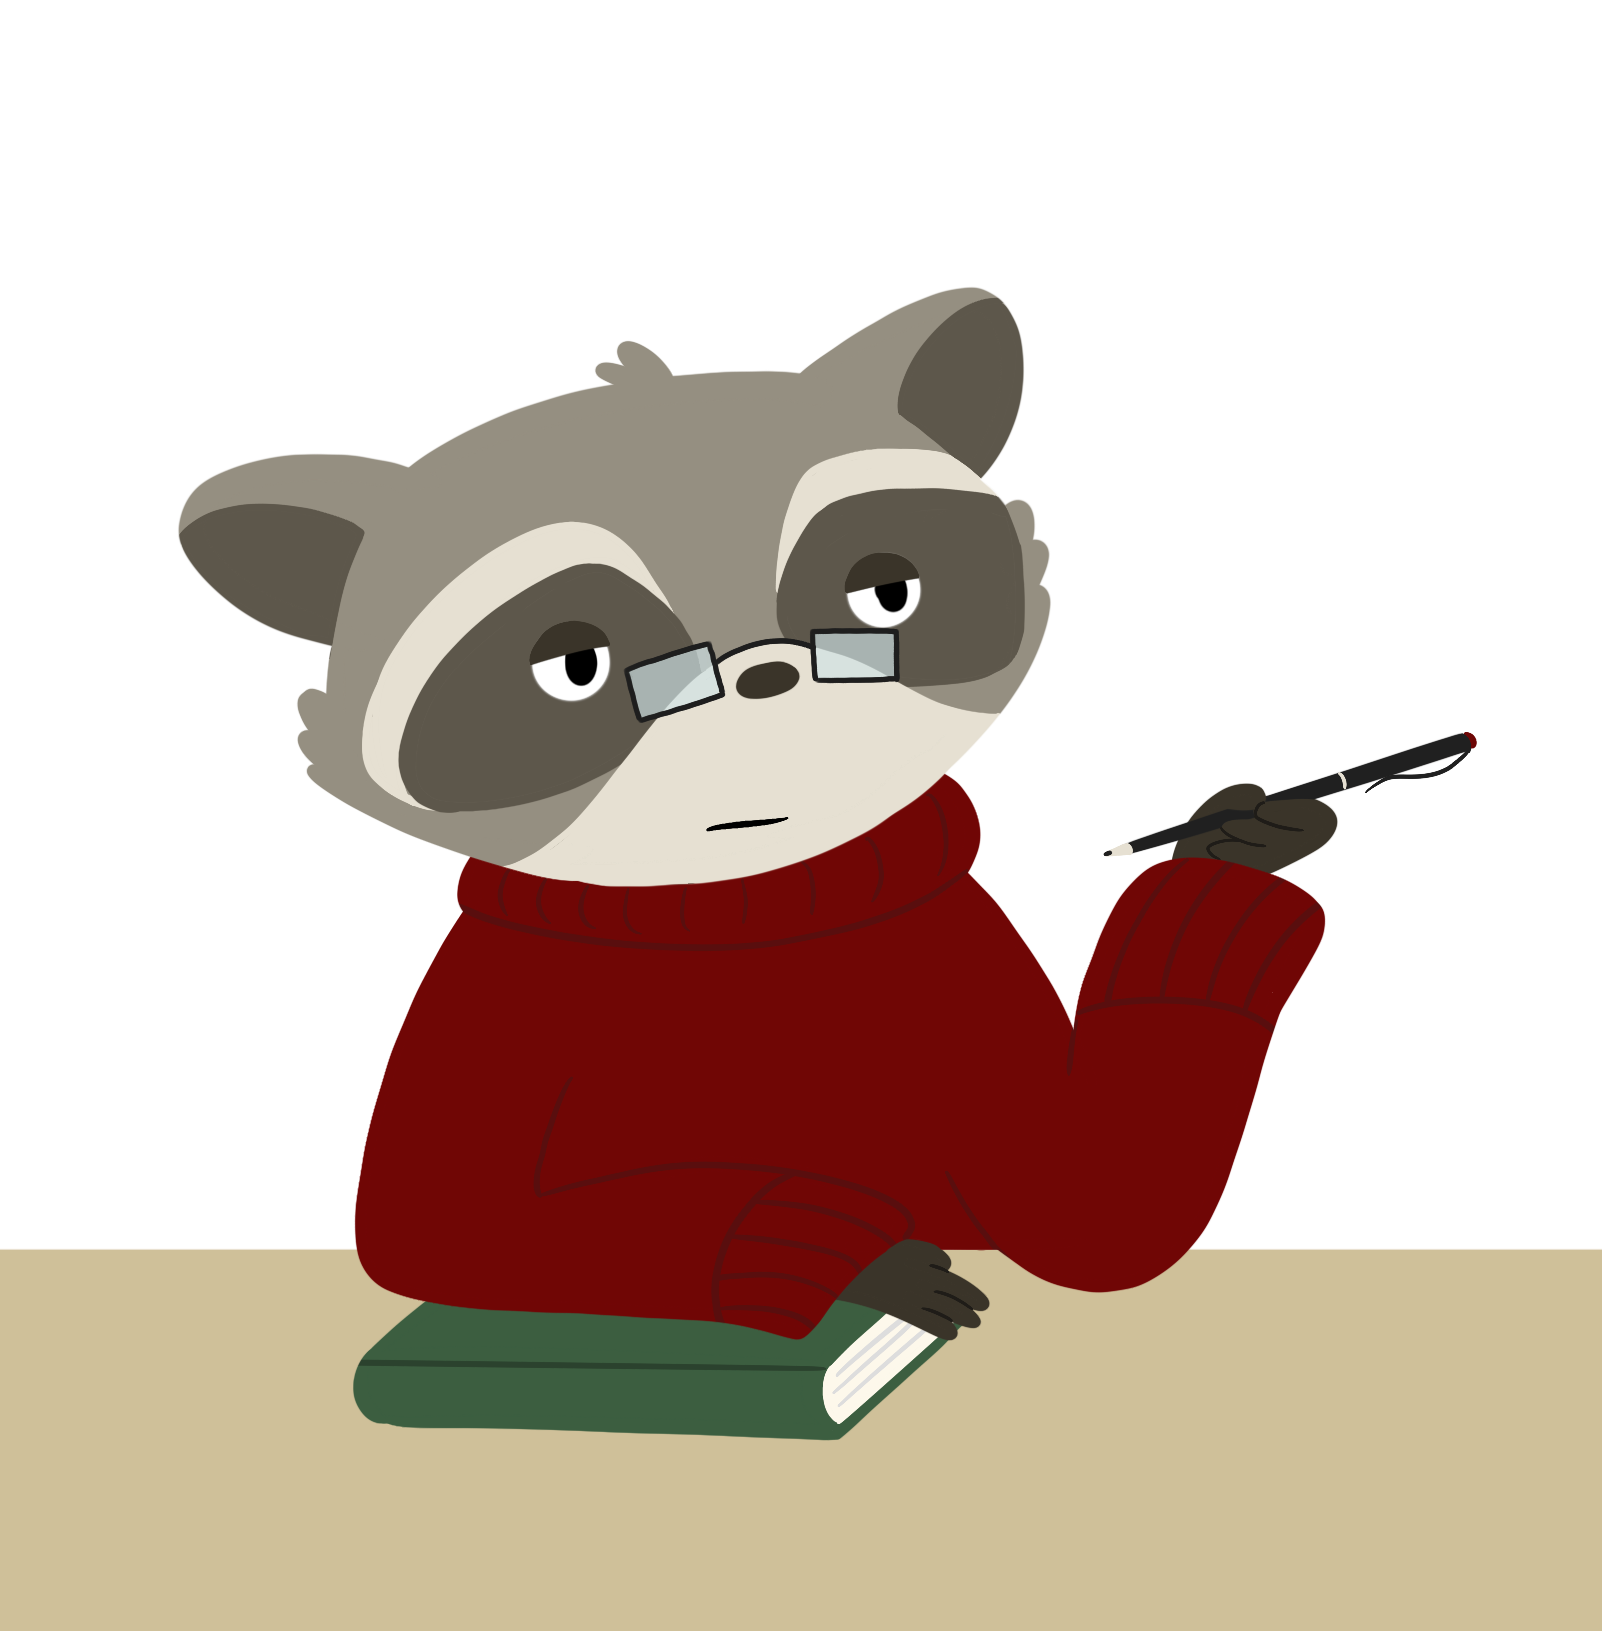 A Raccoon with glasses poses pensively